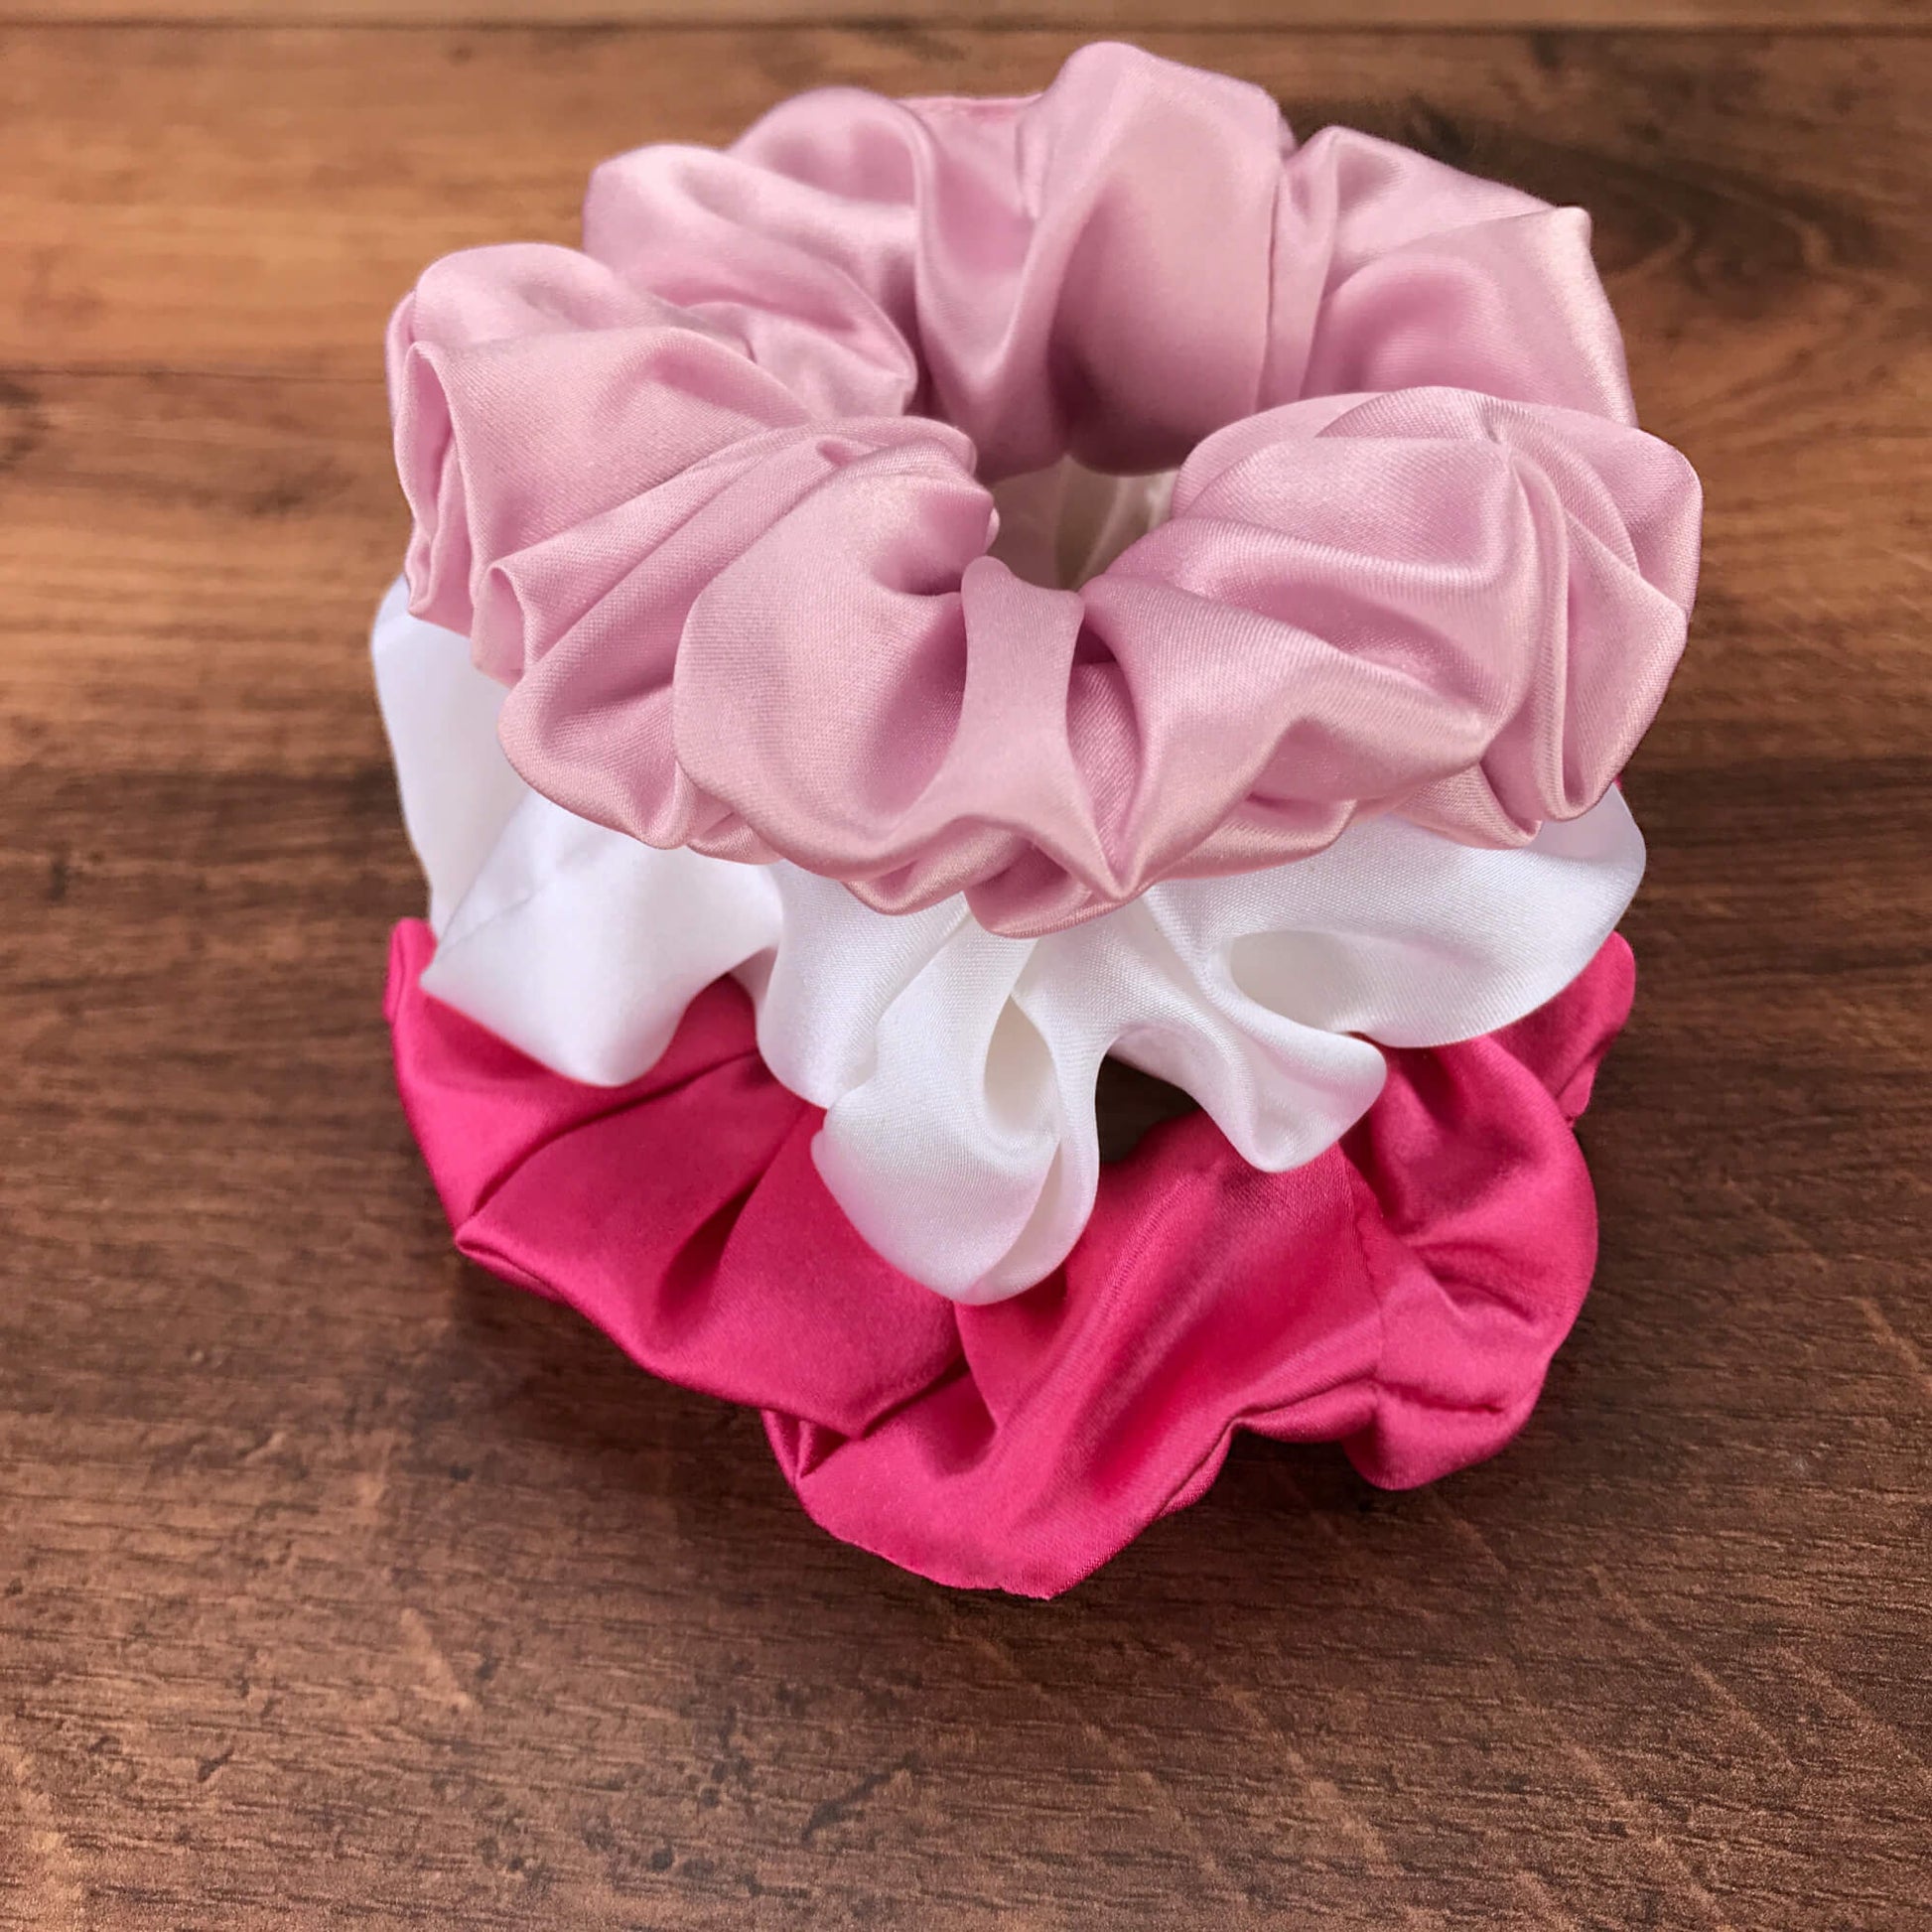 Large soft pink hot pink and white silk hair ties by Celestial Silk stacked in a pile on a wood vanity